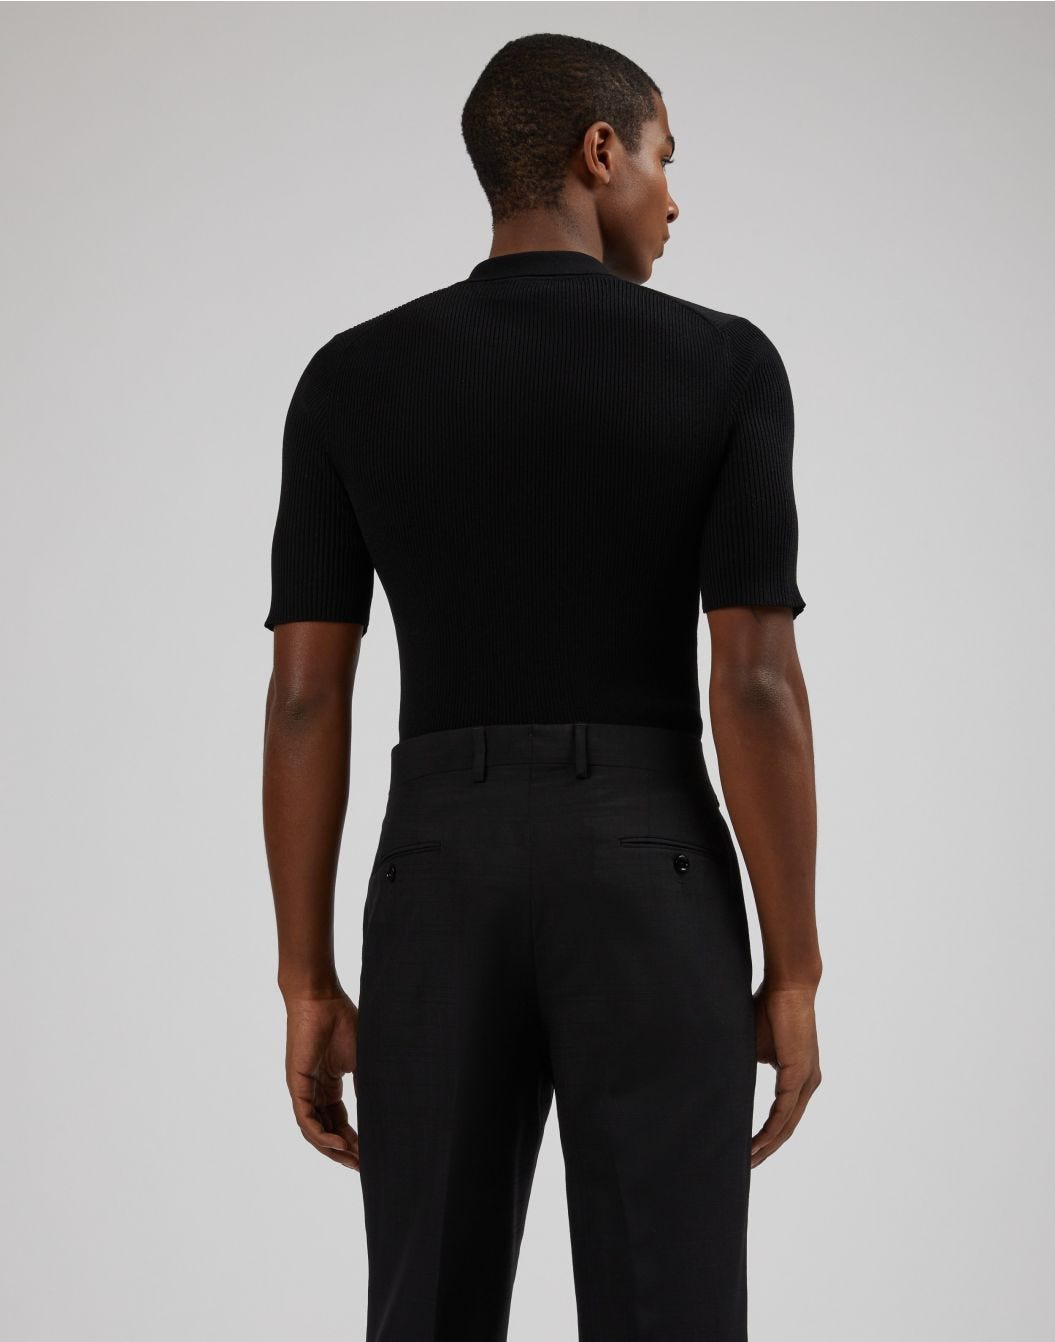 Black buttoned polo shirt with a rib knit